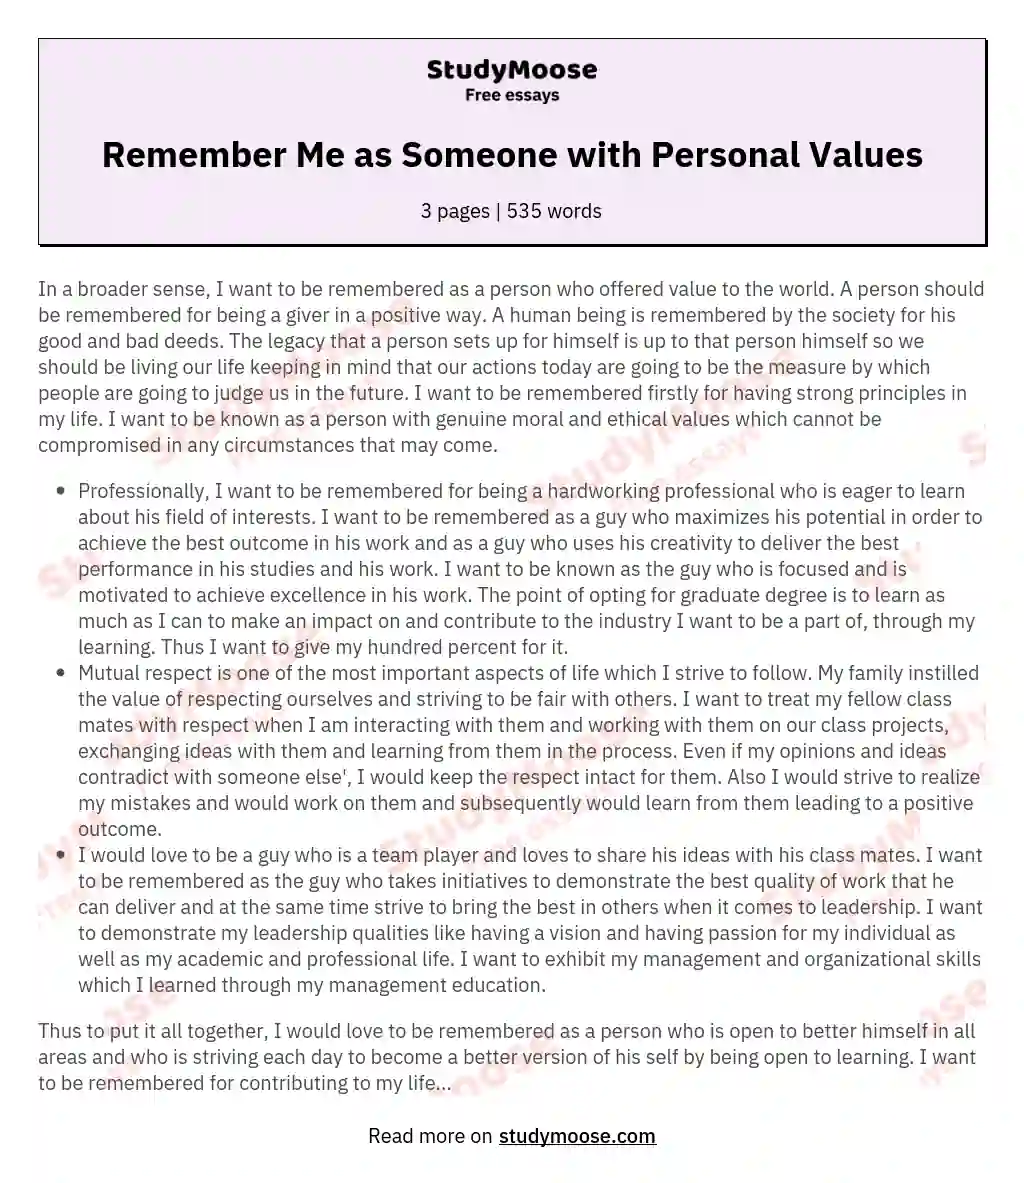 Remember Me as Someone with Personal Values essay